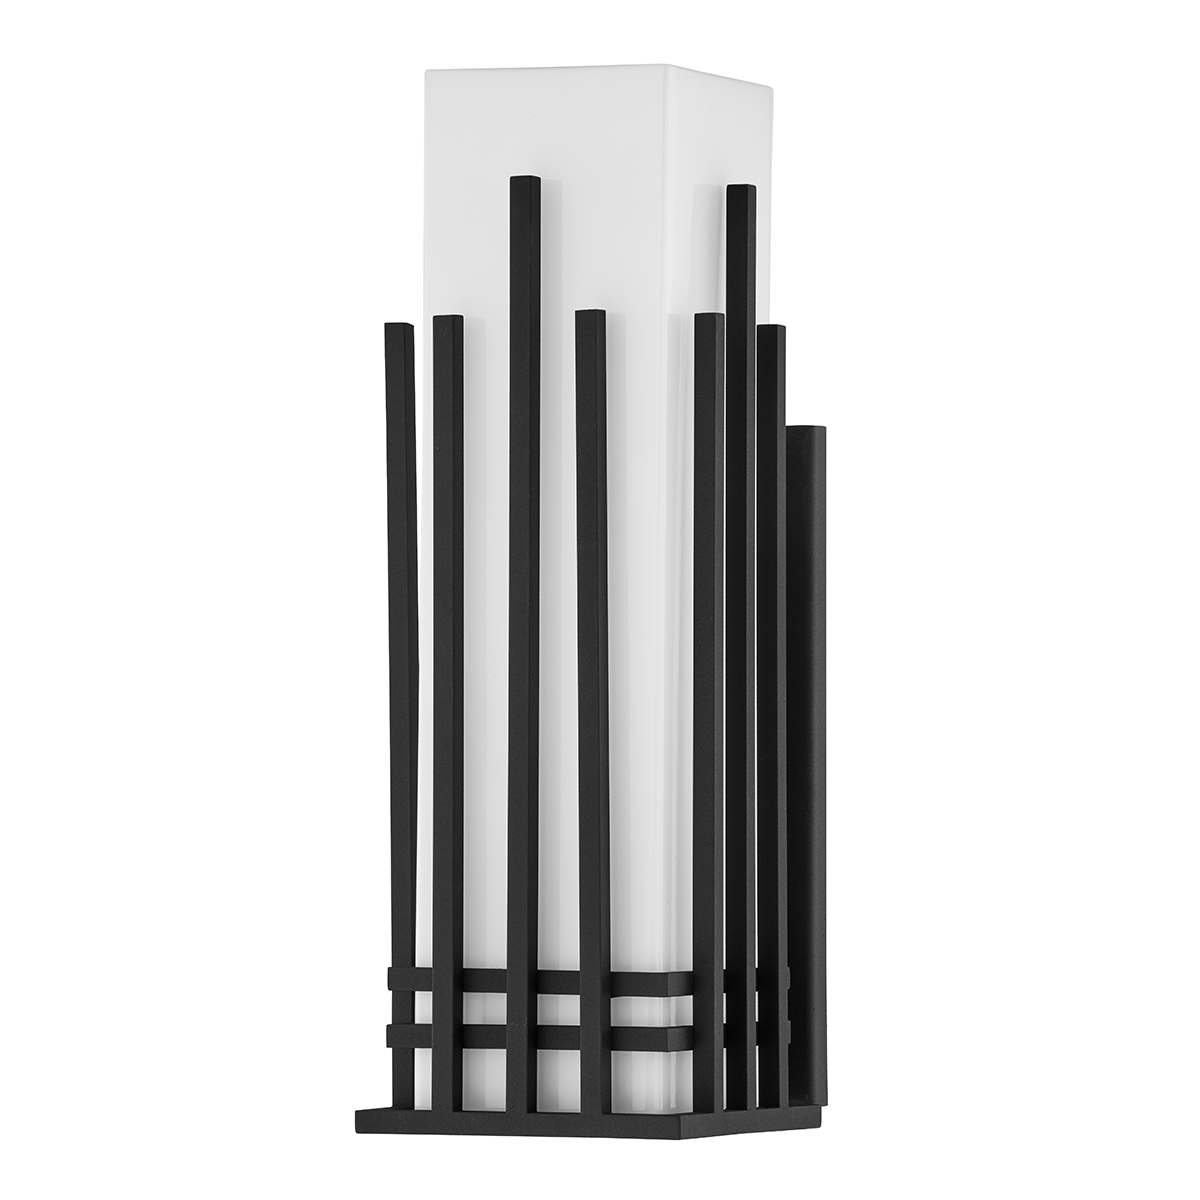 Troy Lighting 3 LIGHT LARGE EXTERIOR WALL SCONCE B5413